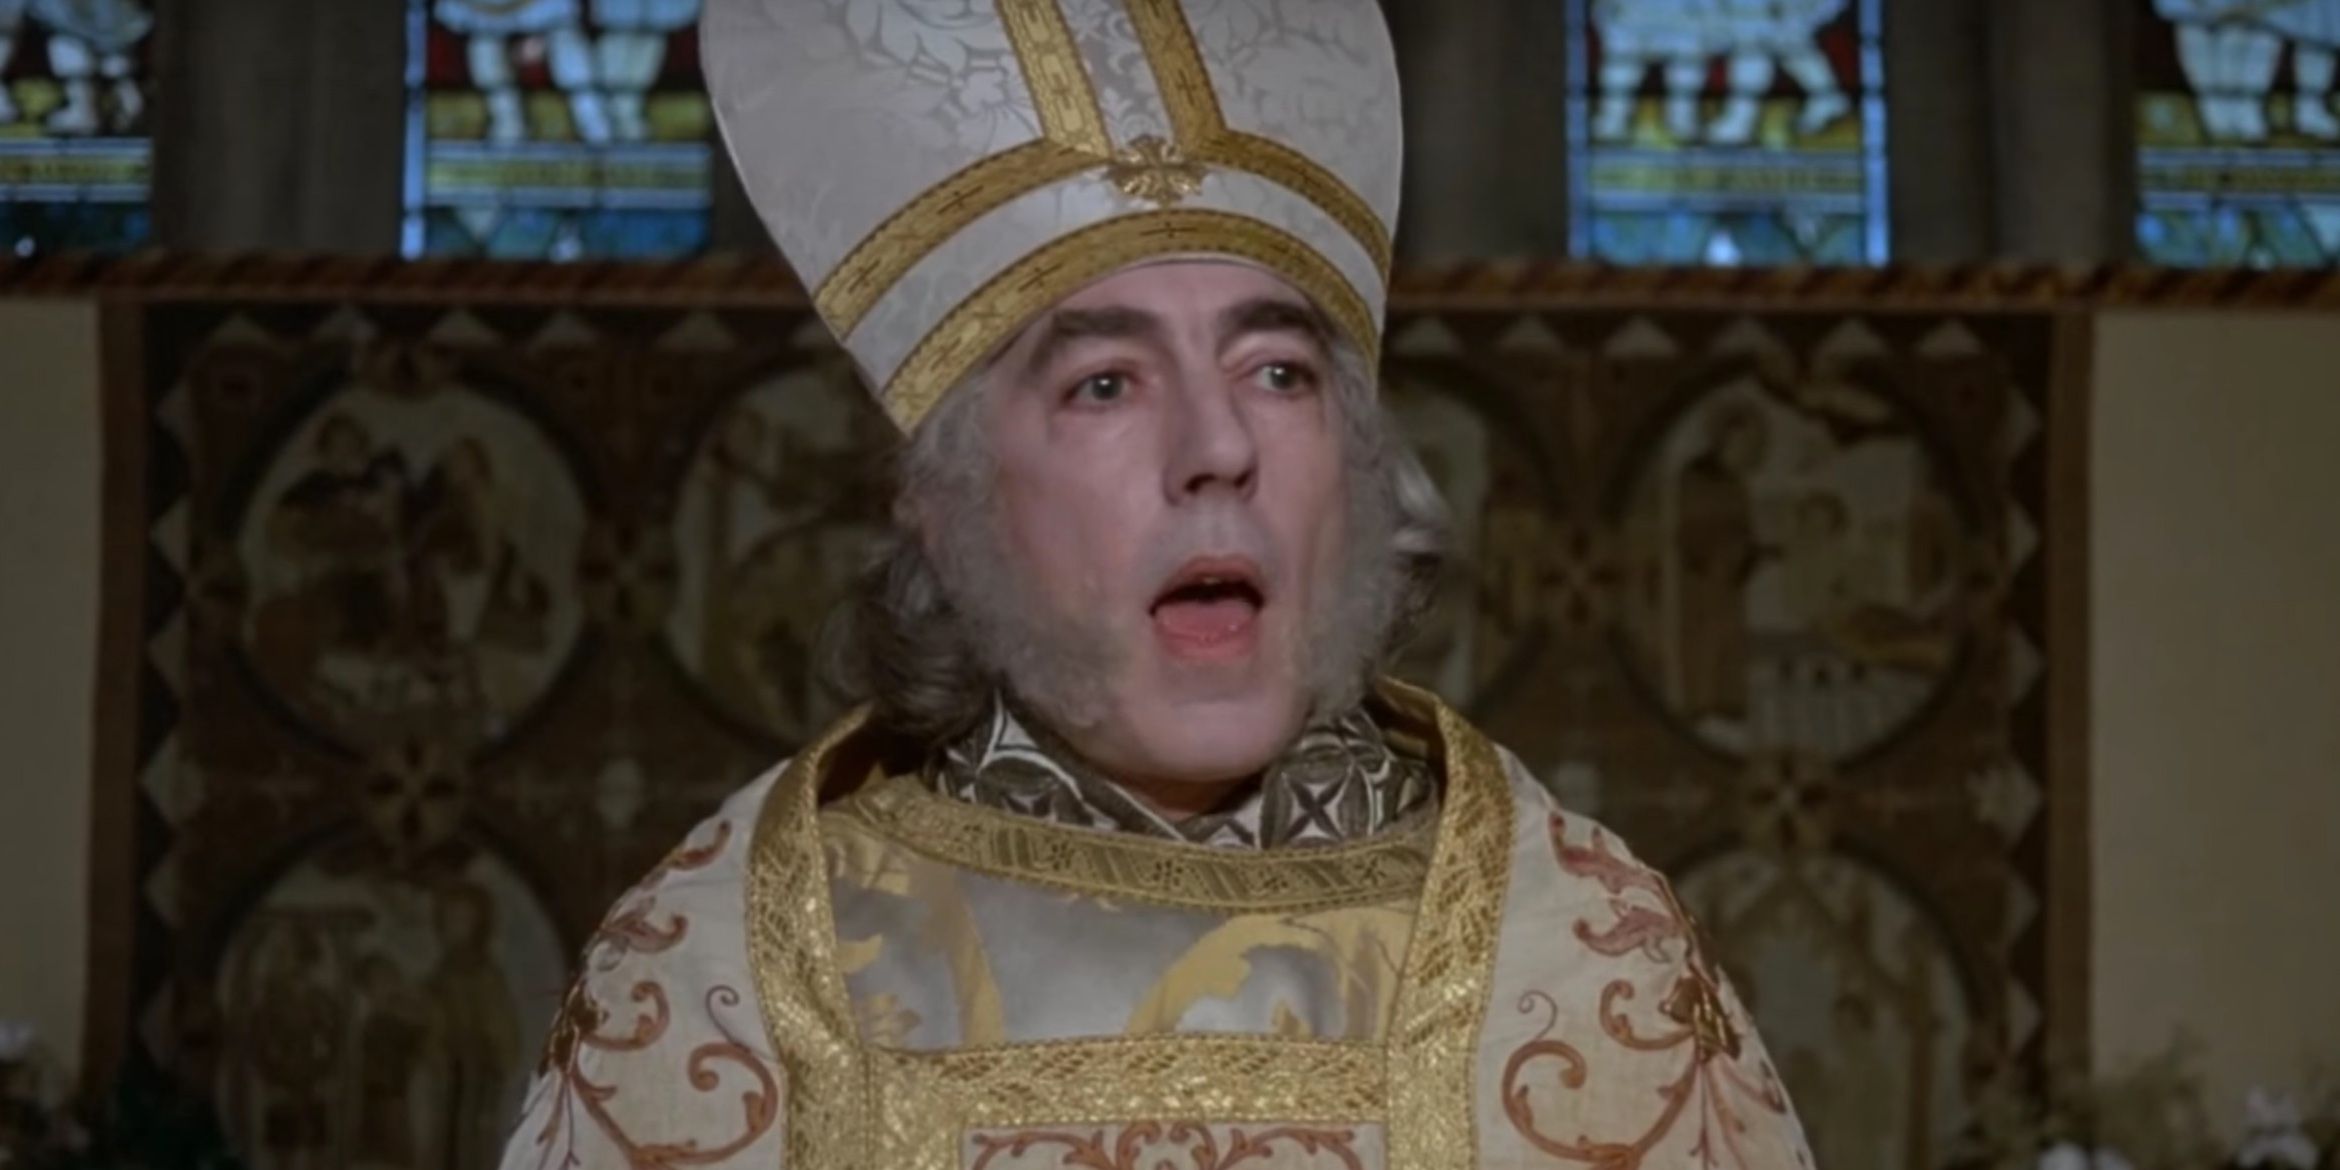 Peter Cook in The Princess Bride